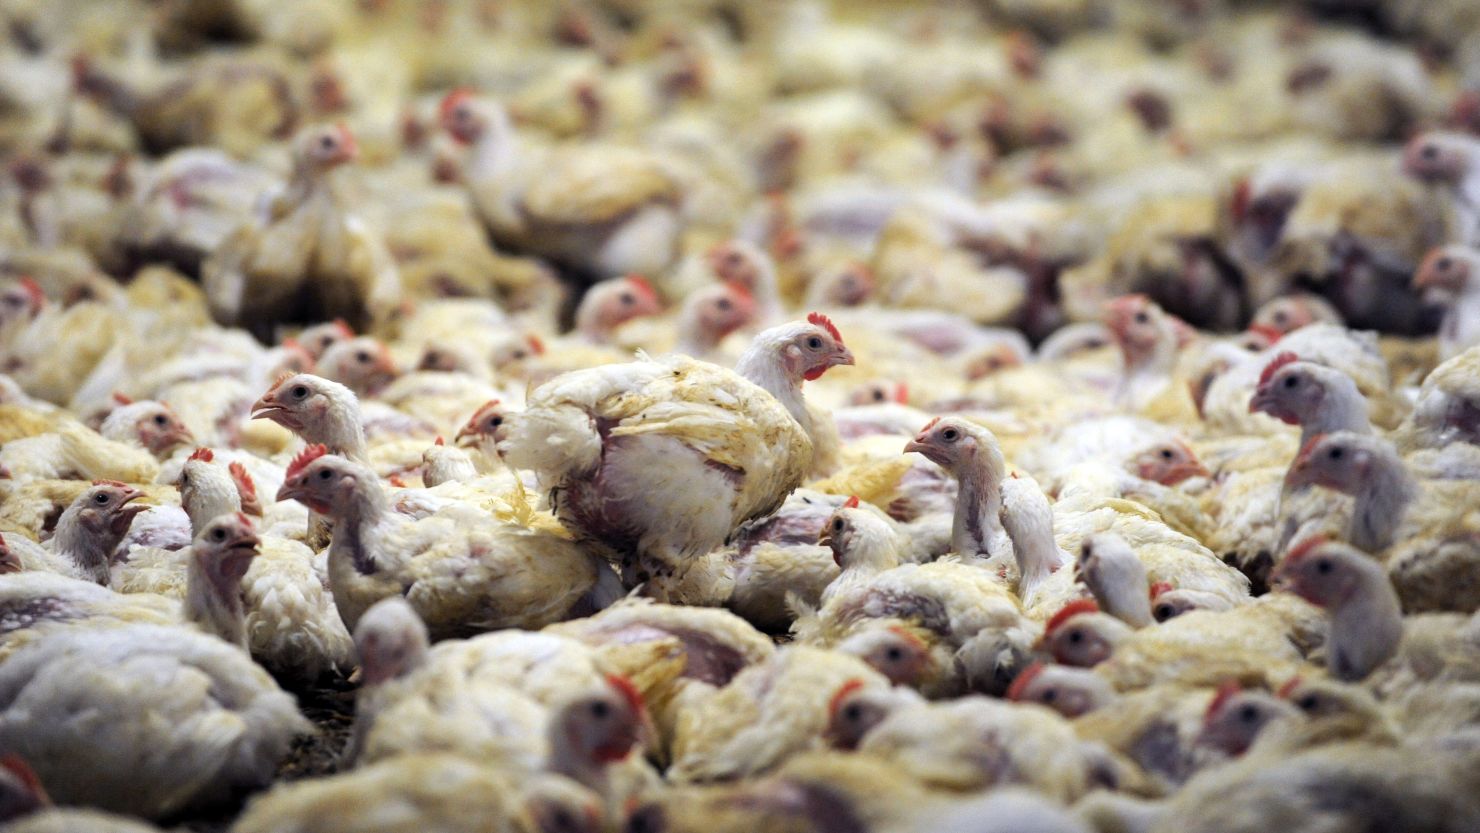 Expect temporary changes in the meat case - Animal Agriculture